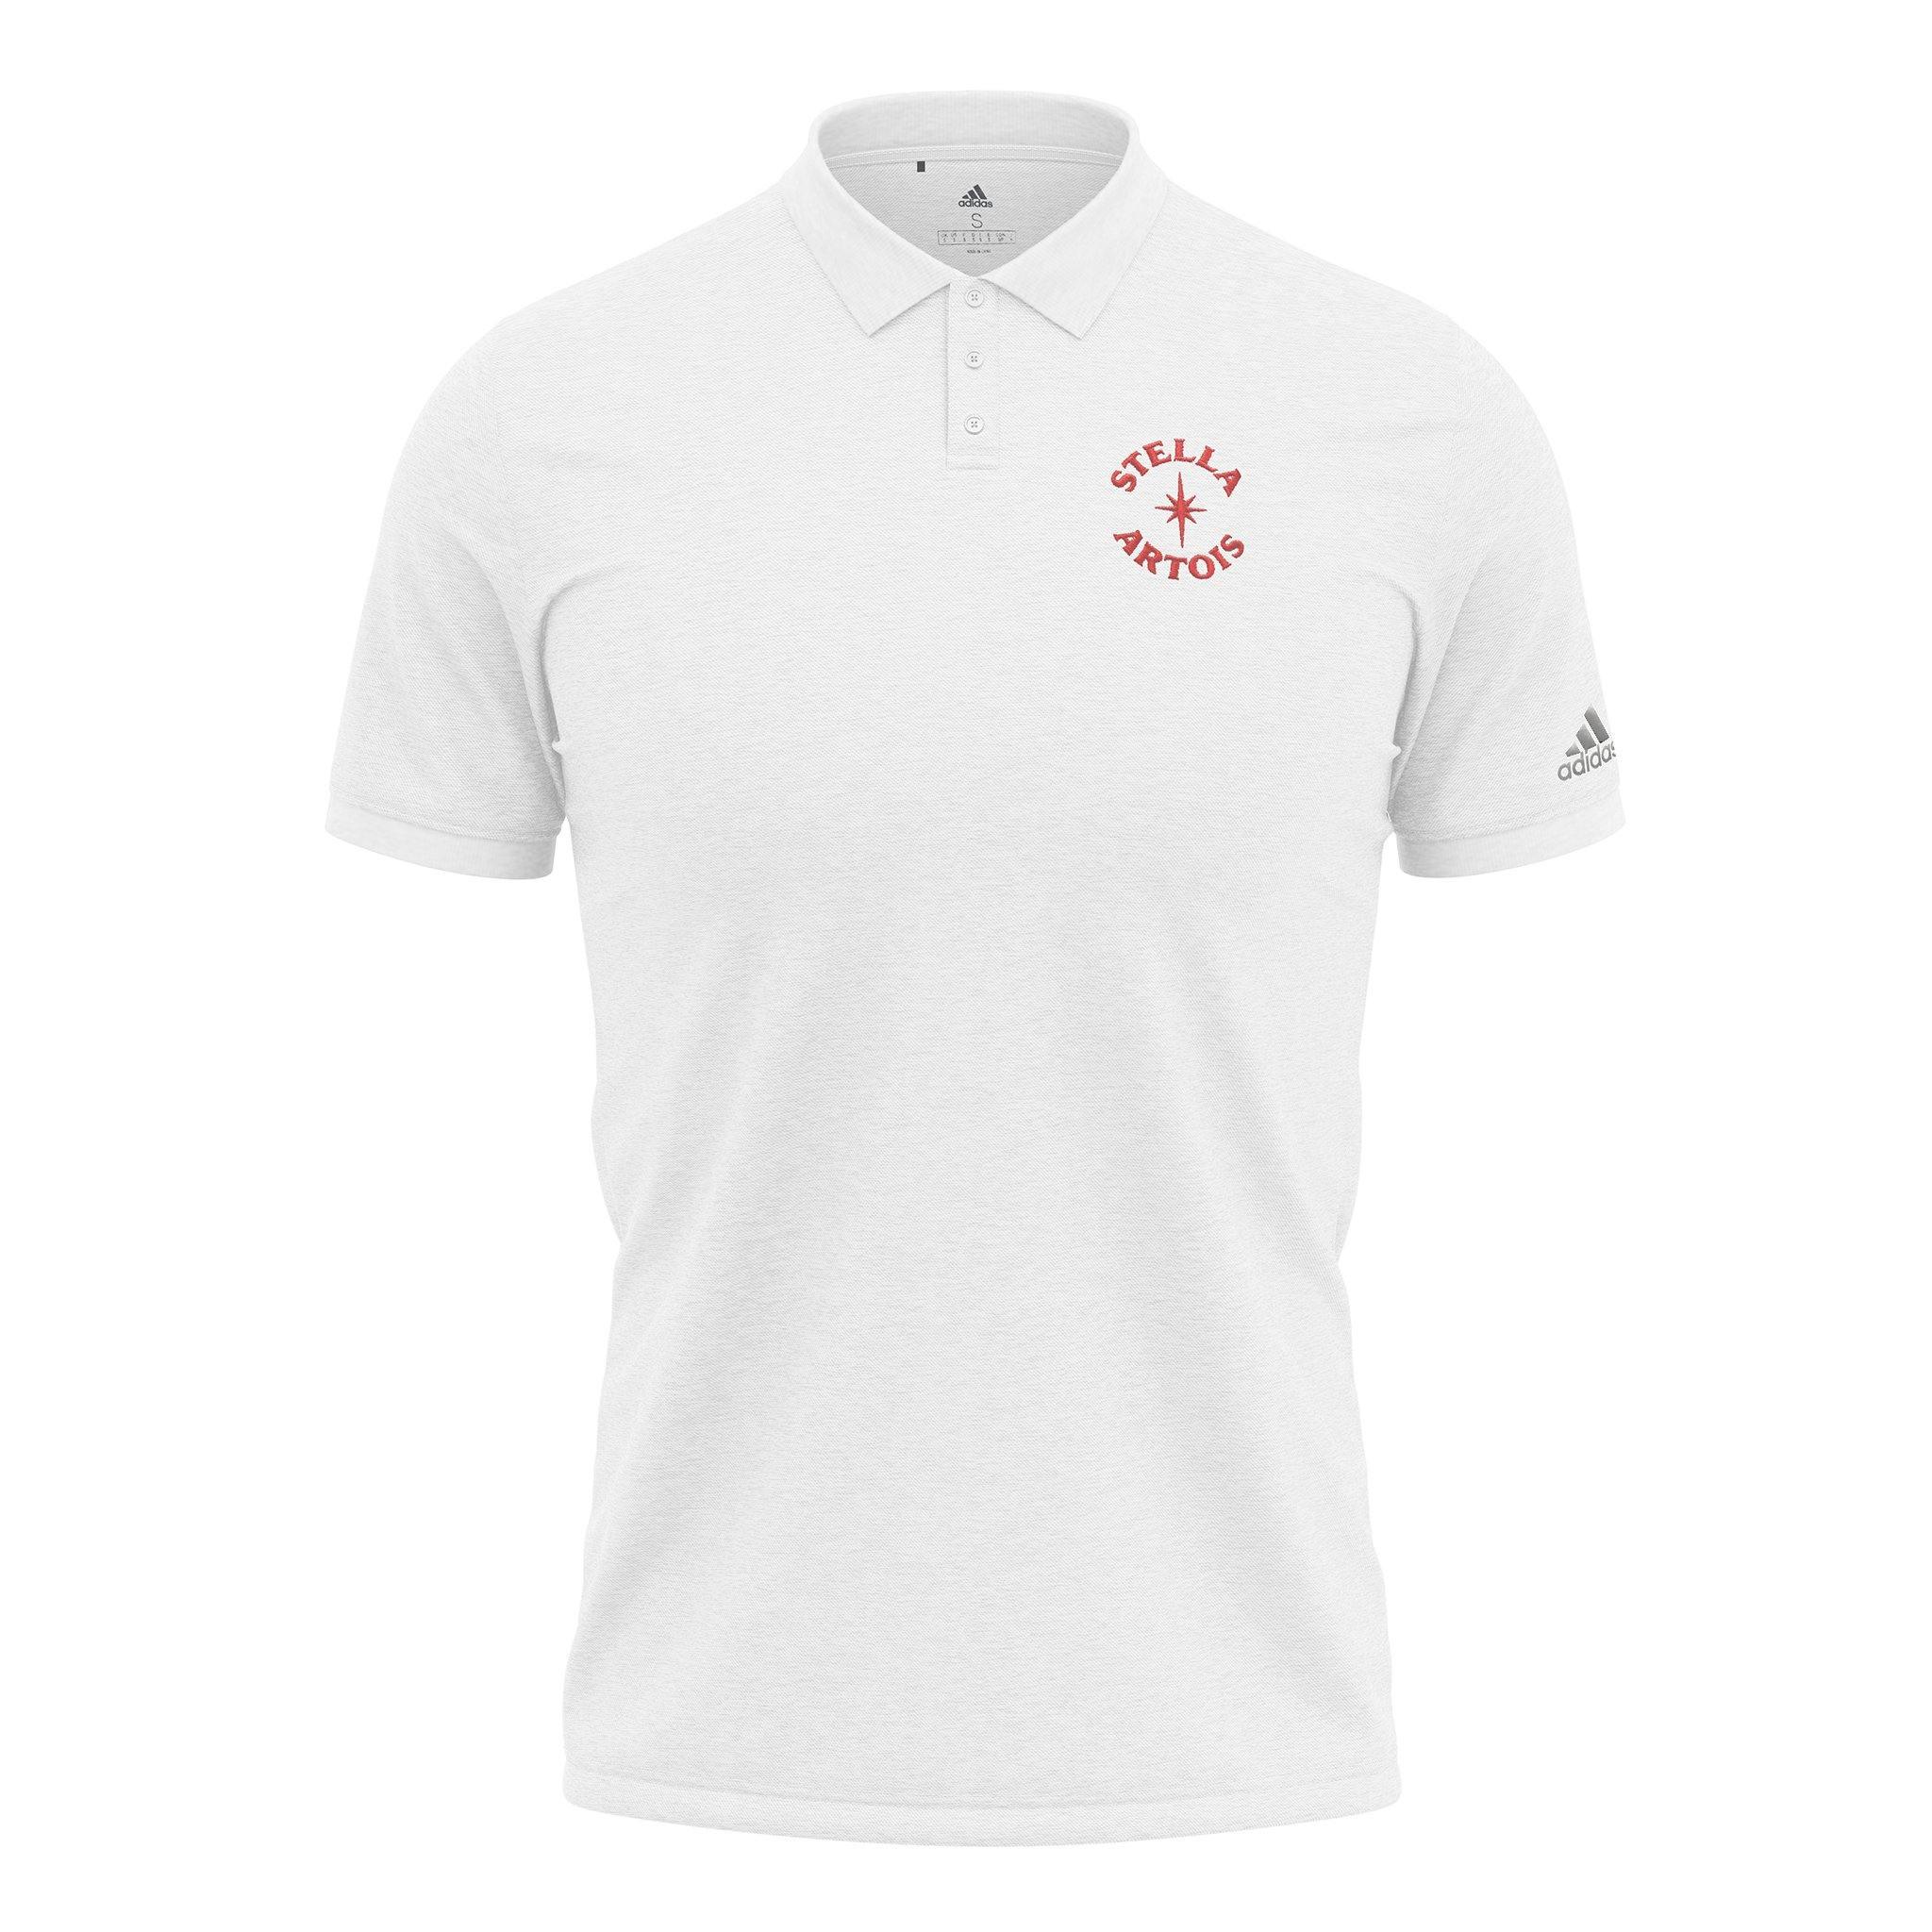 white stella artois polo with stella artois logo on the upper left chest area and the adidas logo on the left sleeve